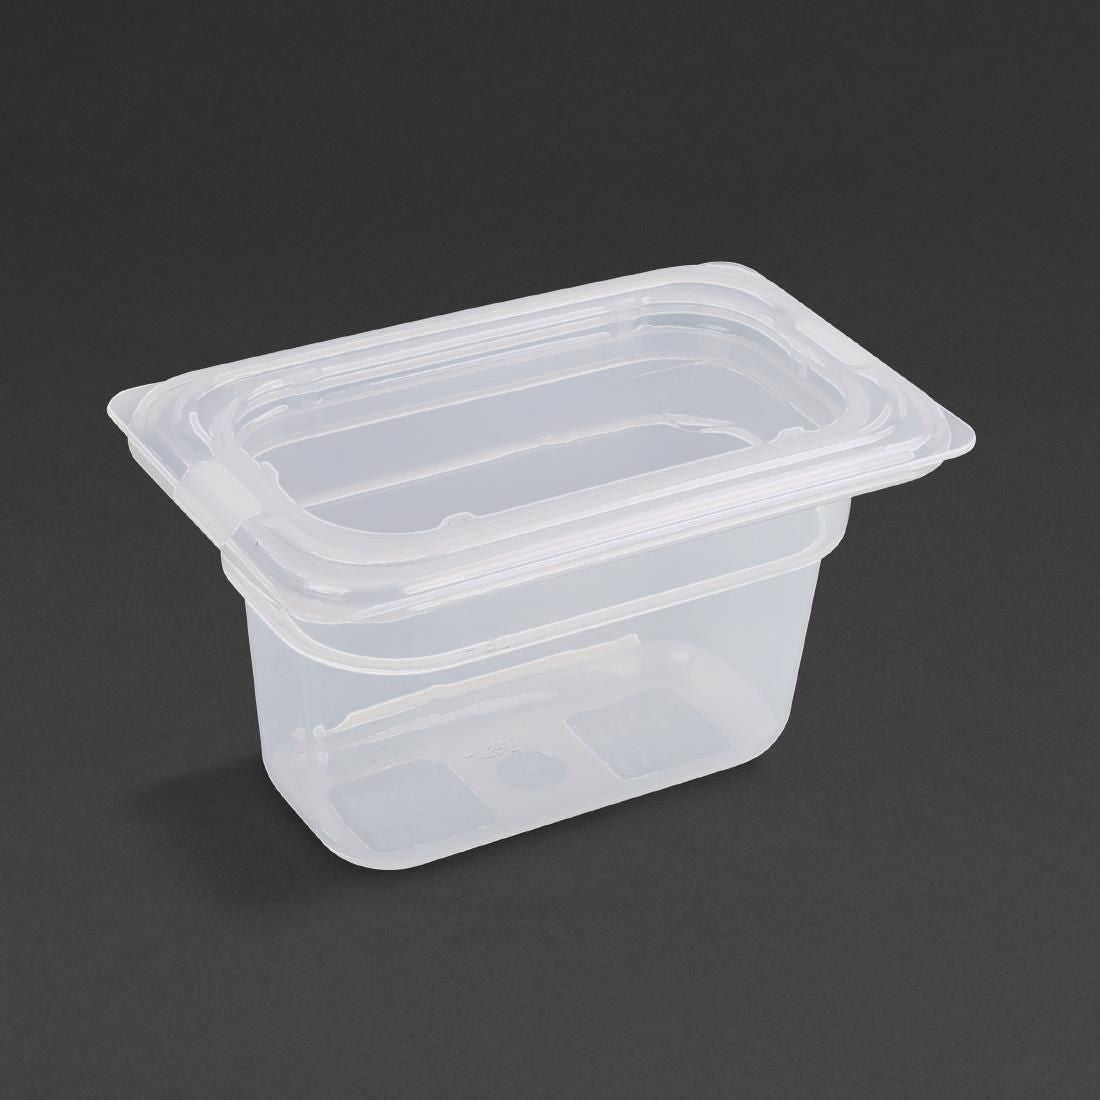 GJ529 Vogue Polypropylene 1/9 Gastronorm Container with Lid 100mm (Pack of 4) JD Catering Equipment Solutions Ltd